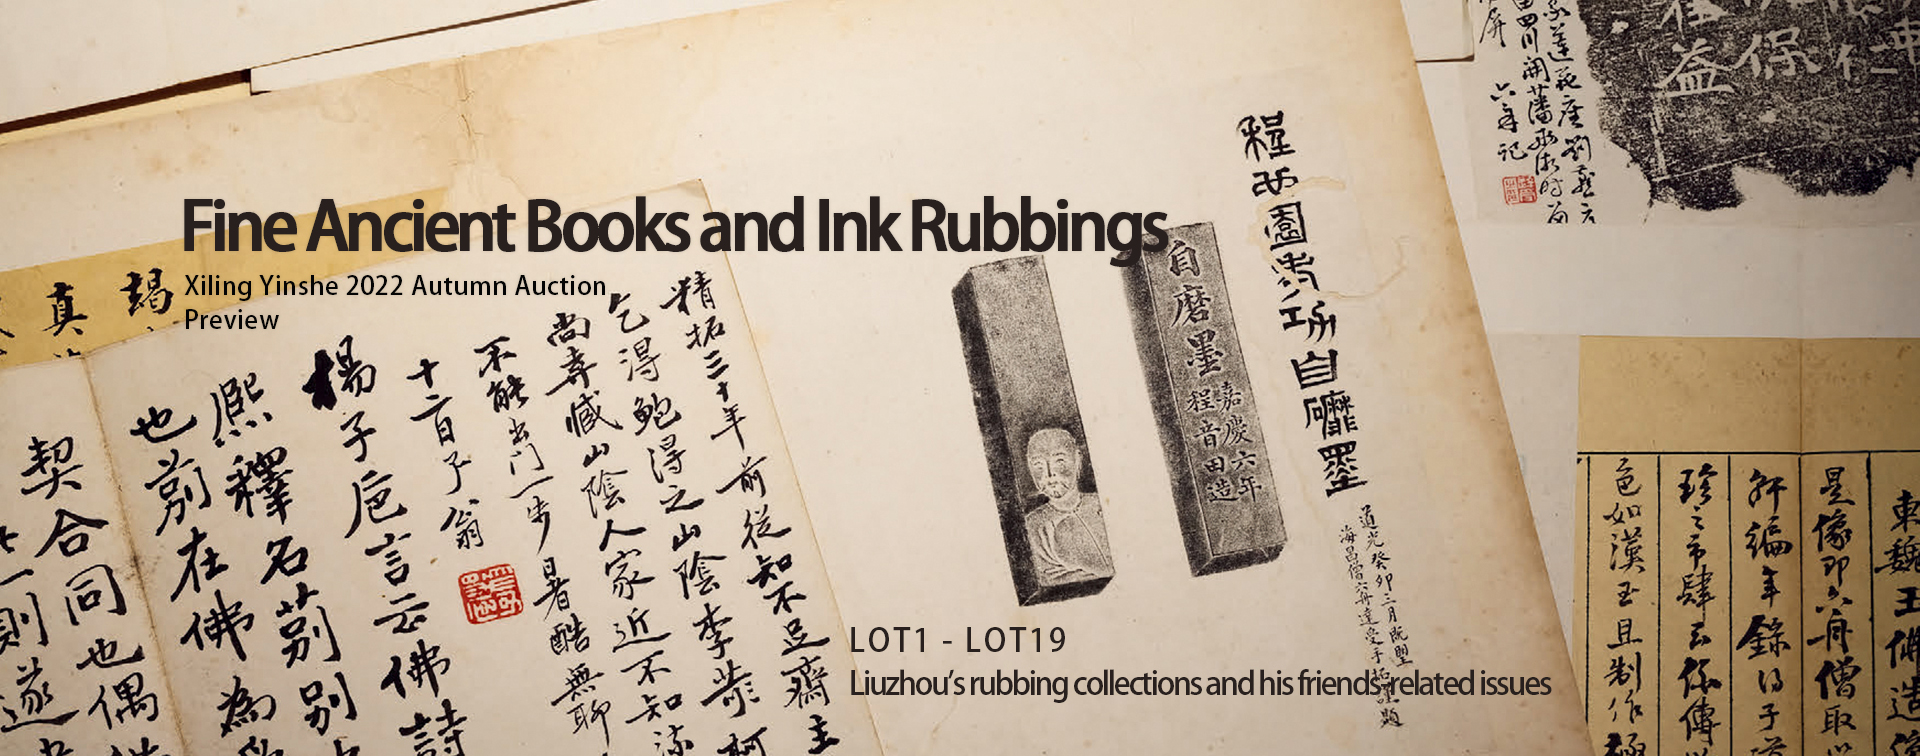 Xiling Yinshe 2022 Autumn Auction | Fine Ancient Books & Rubbings